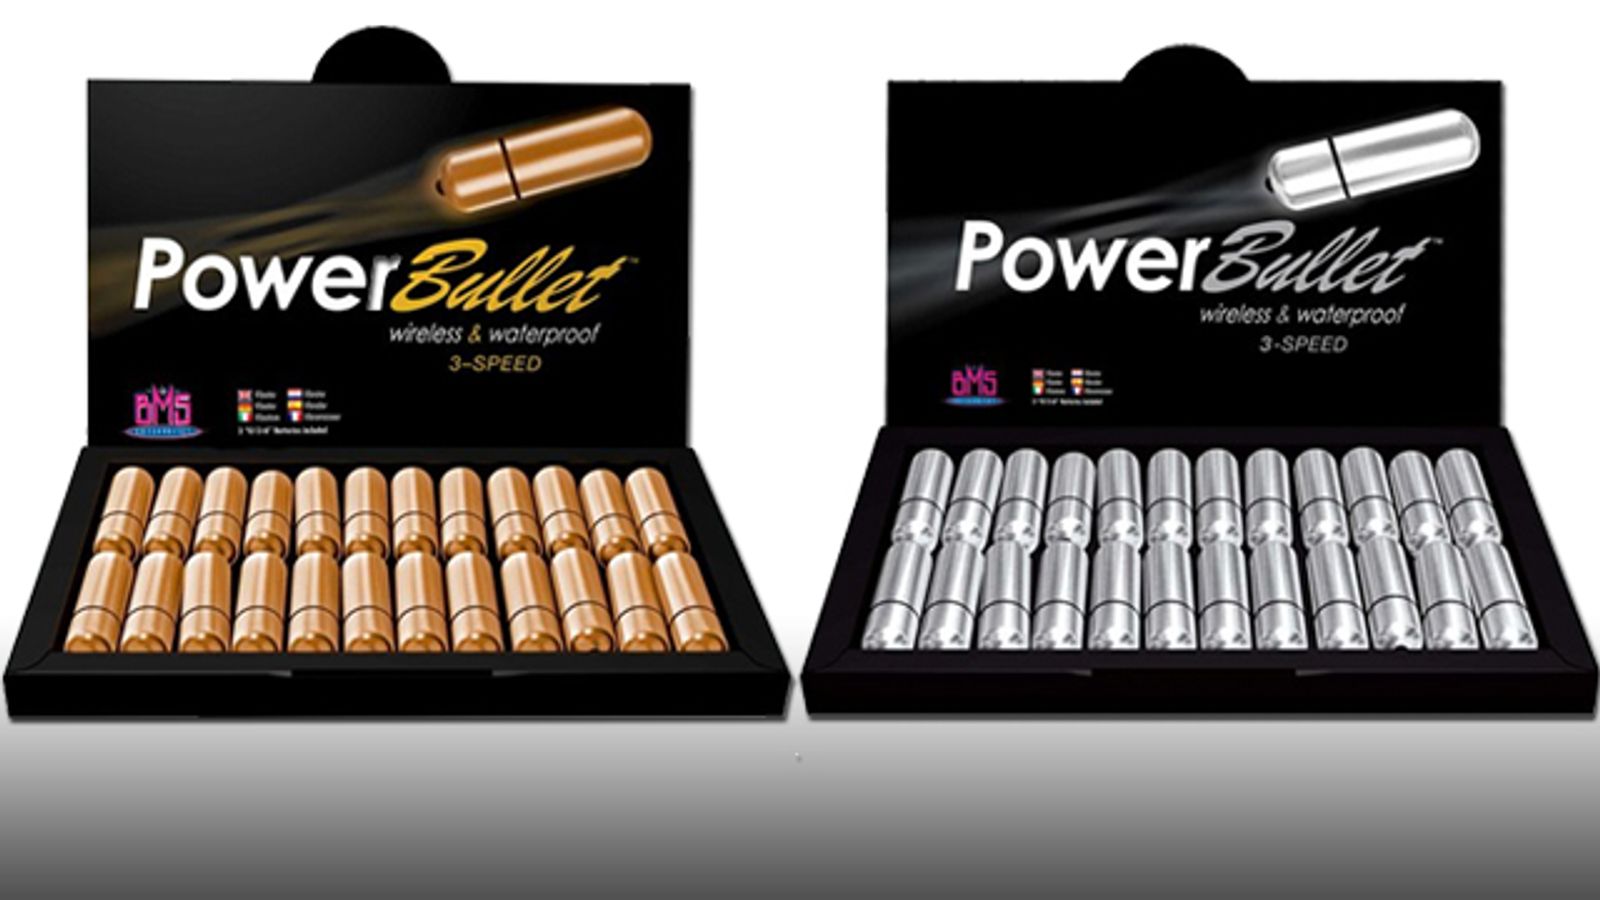 PowerBullet Shares Its Power